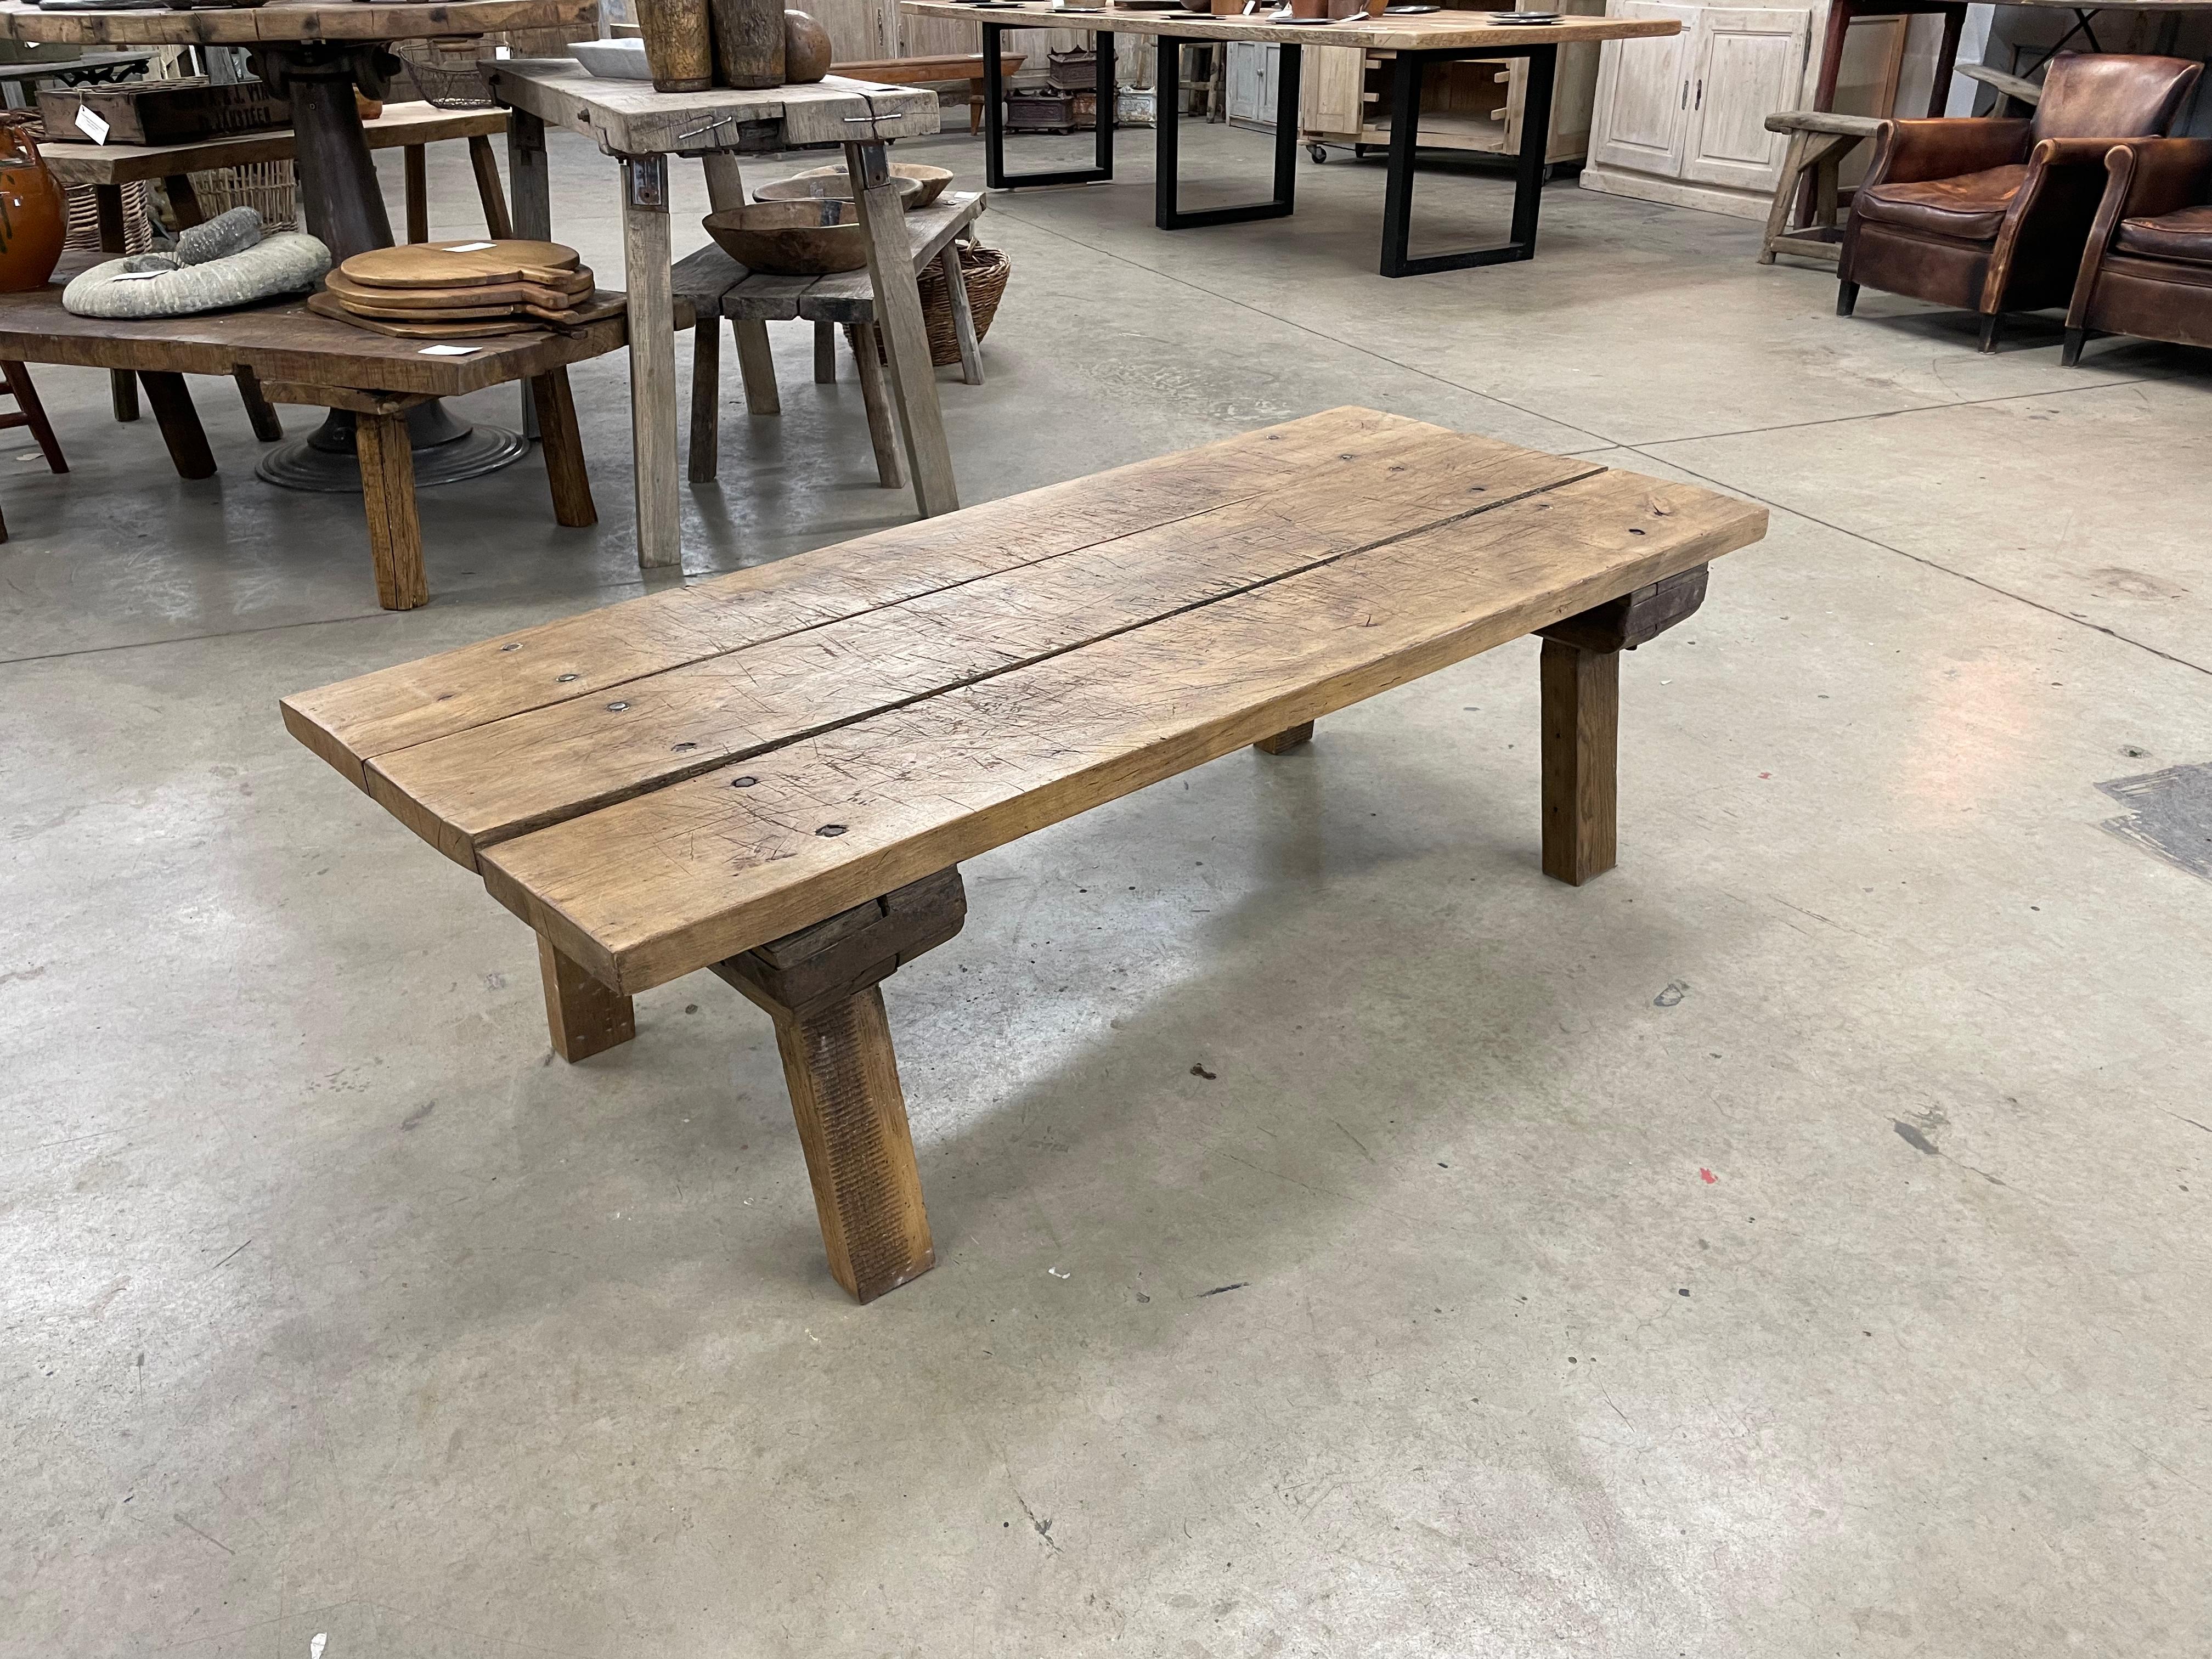 Antique Hungarian primitive gnarly butcher block rustic farmhouse table reduced to coffee table height.

The 3 plank chunky top with all its imperfections of decades of use, sits on 4 simple splayed legs. A perfect wabi sabi addition to the home.